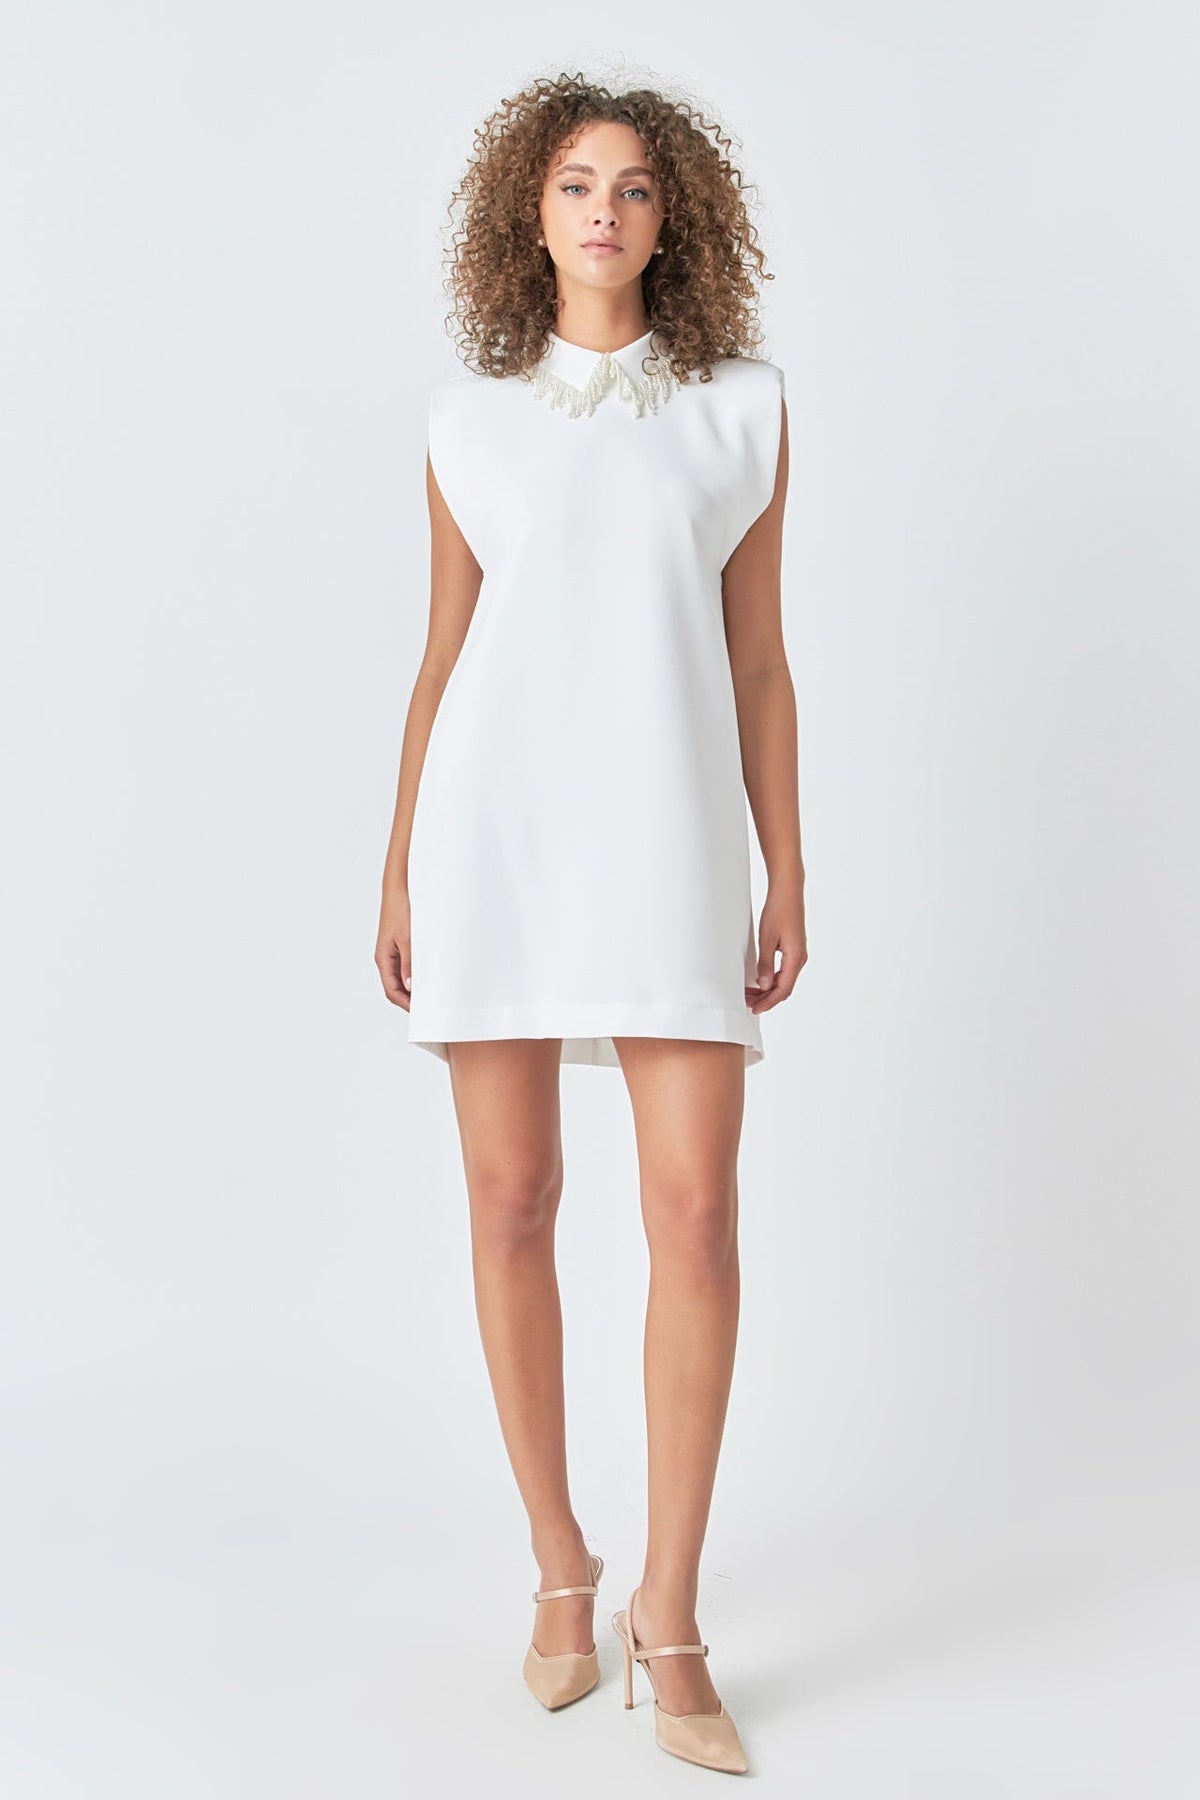 ENDLESS ROSE - Pearl Collar Sleeveless Mini Dress - DRESSES available at Objectrare